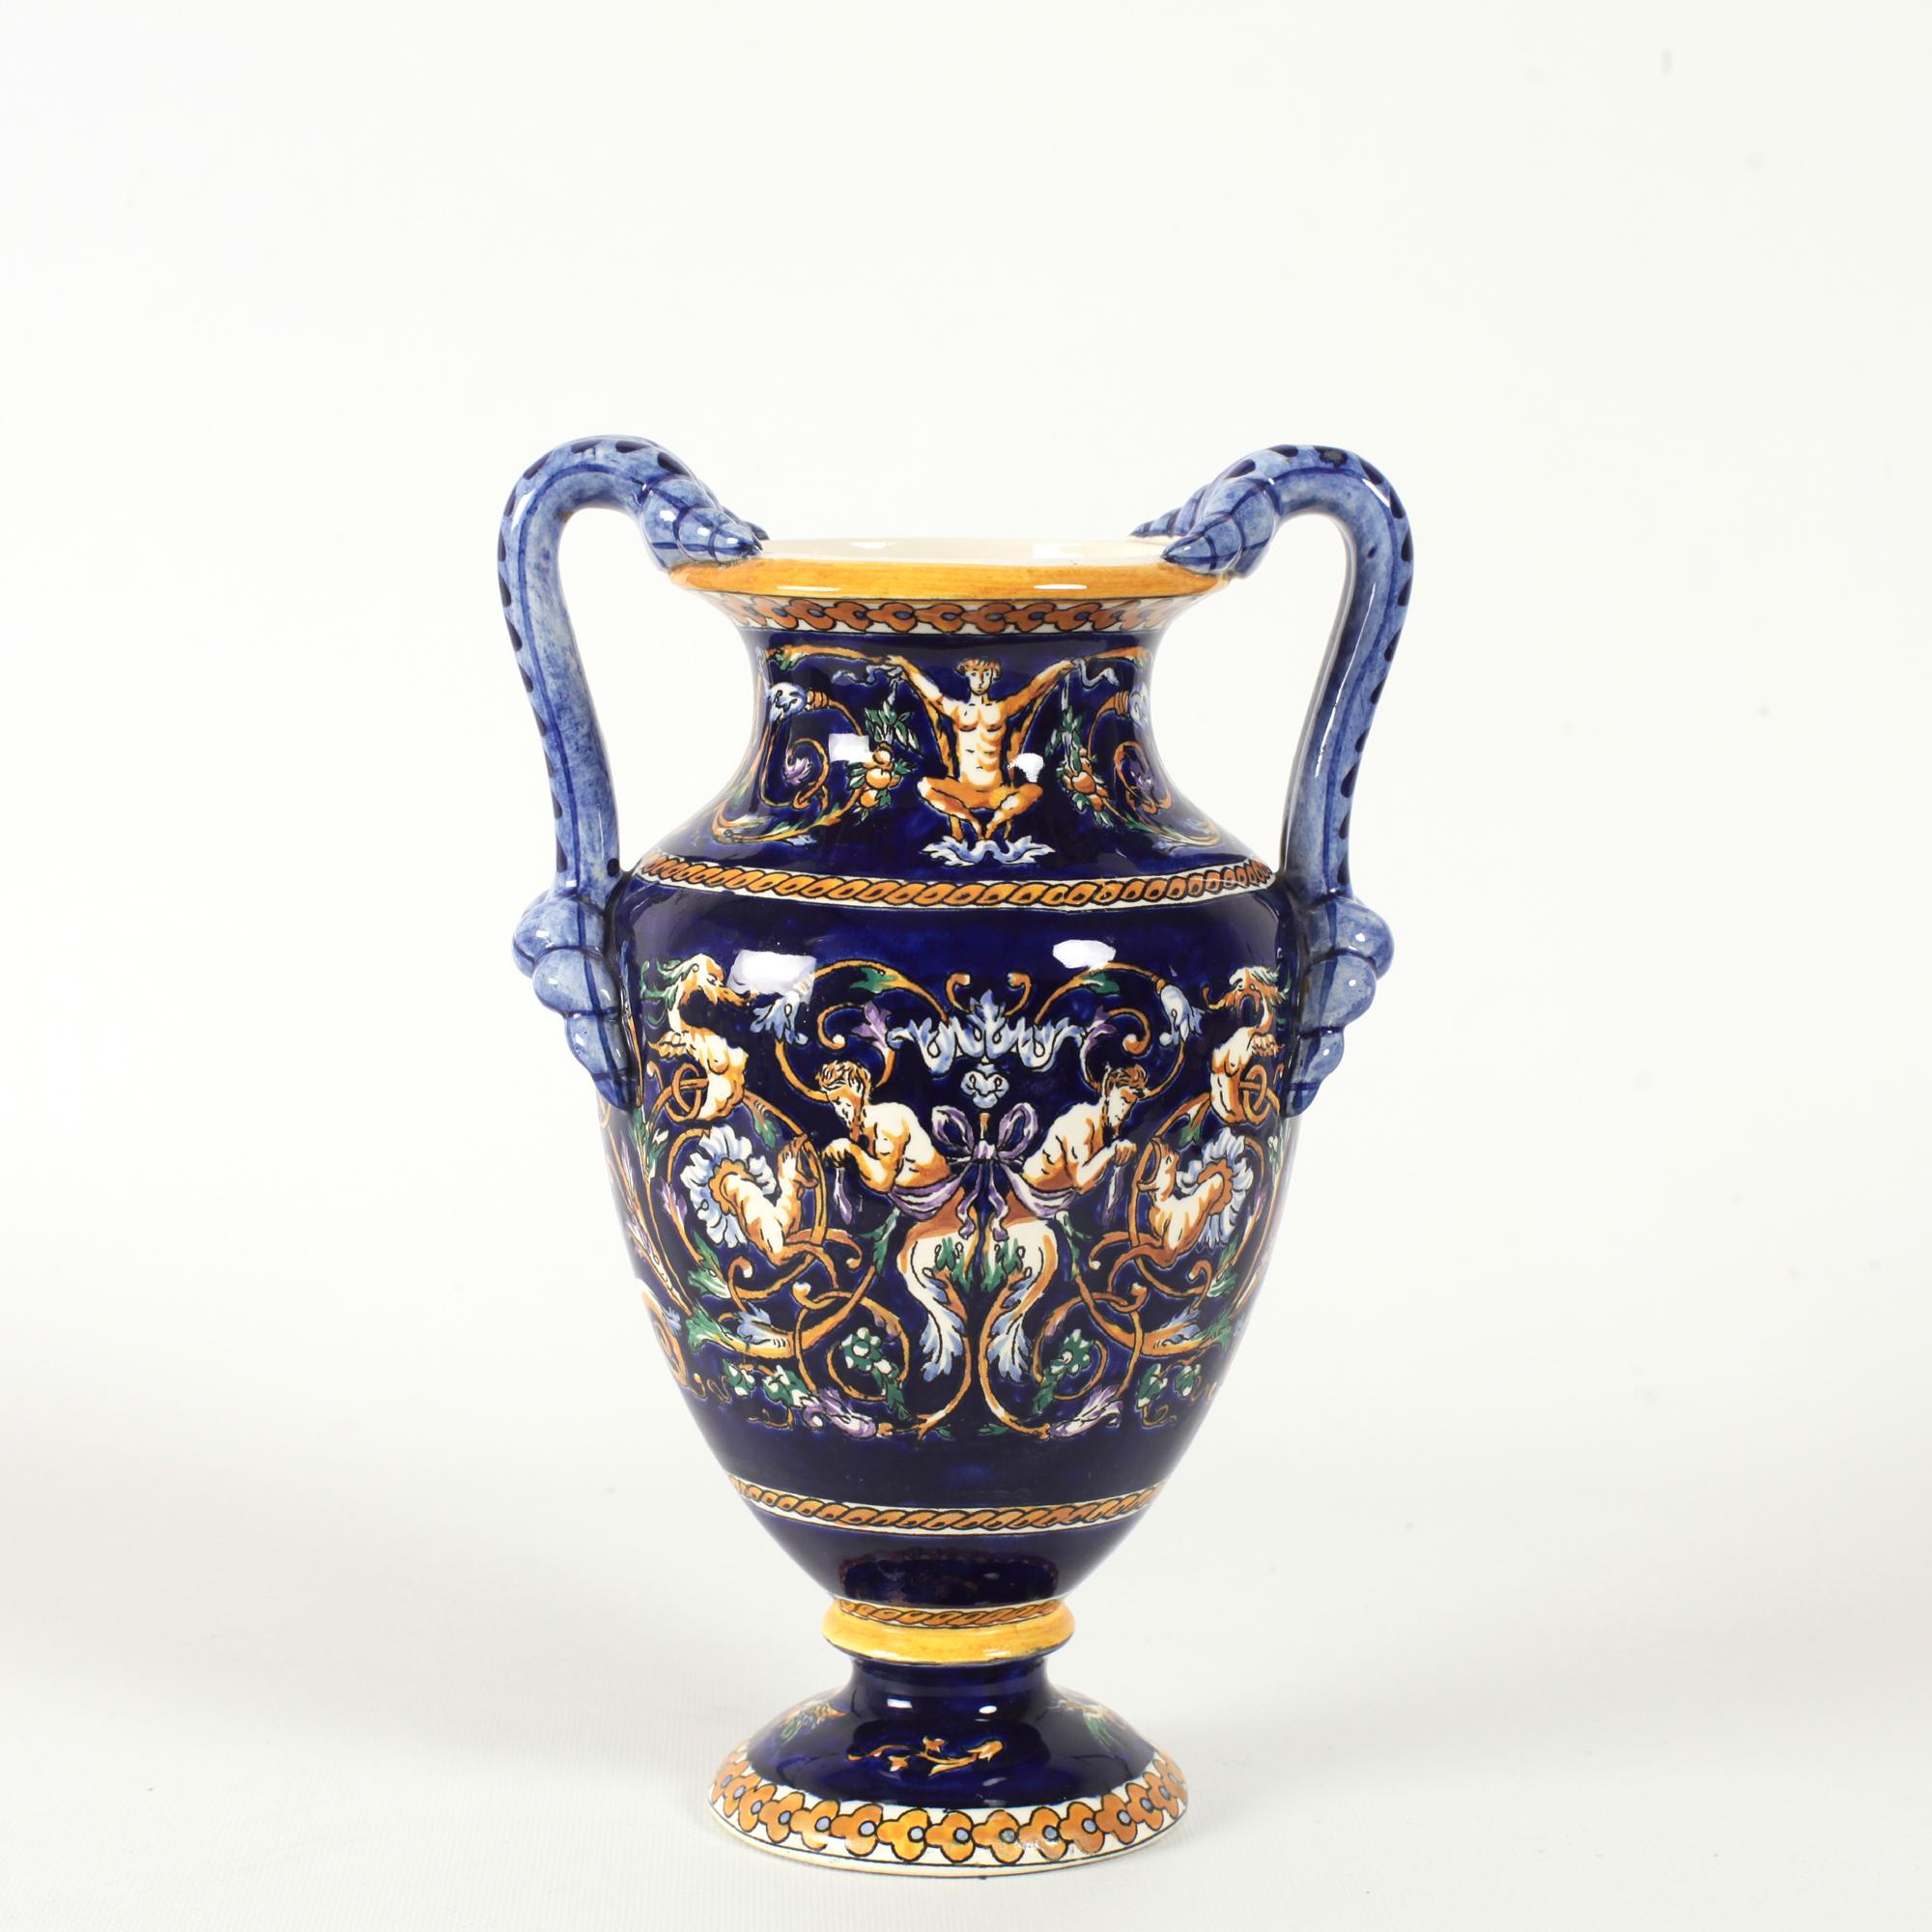 Elegant vase is round in shape and stands on a circular base with cobalt blue background for hand painted grotesque decorations inspired by fifteenth-century Italy. The motifs in yellow, white and brown highlights depict chimeras, scrolls, bearded